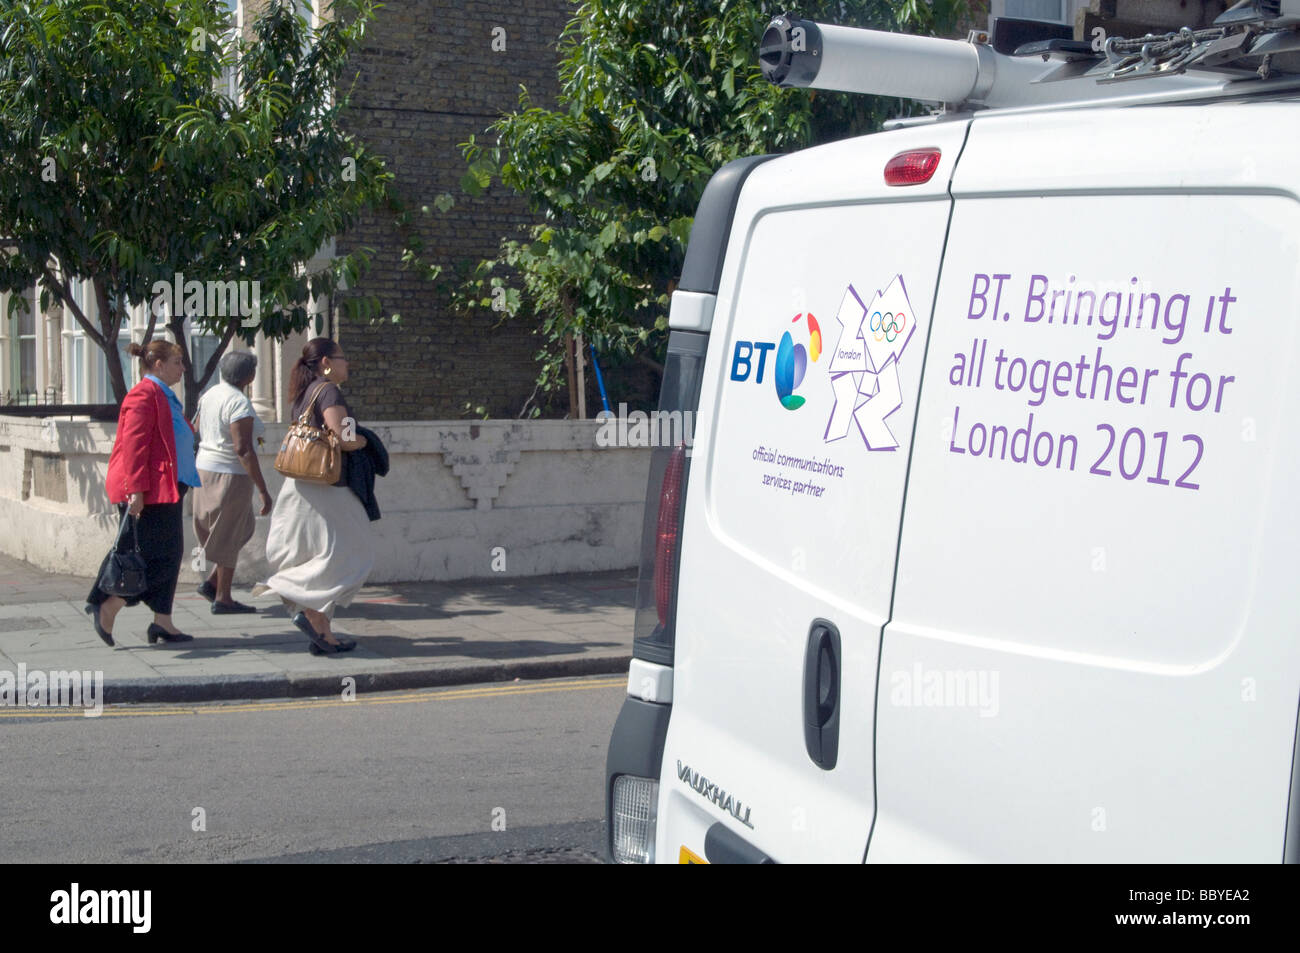 UK. A British Telecom van. BT is an official sponsor of the 2012 Olympics. London,England. Photo by Julio Etchart Stock Photo